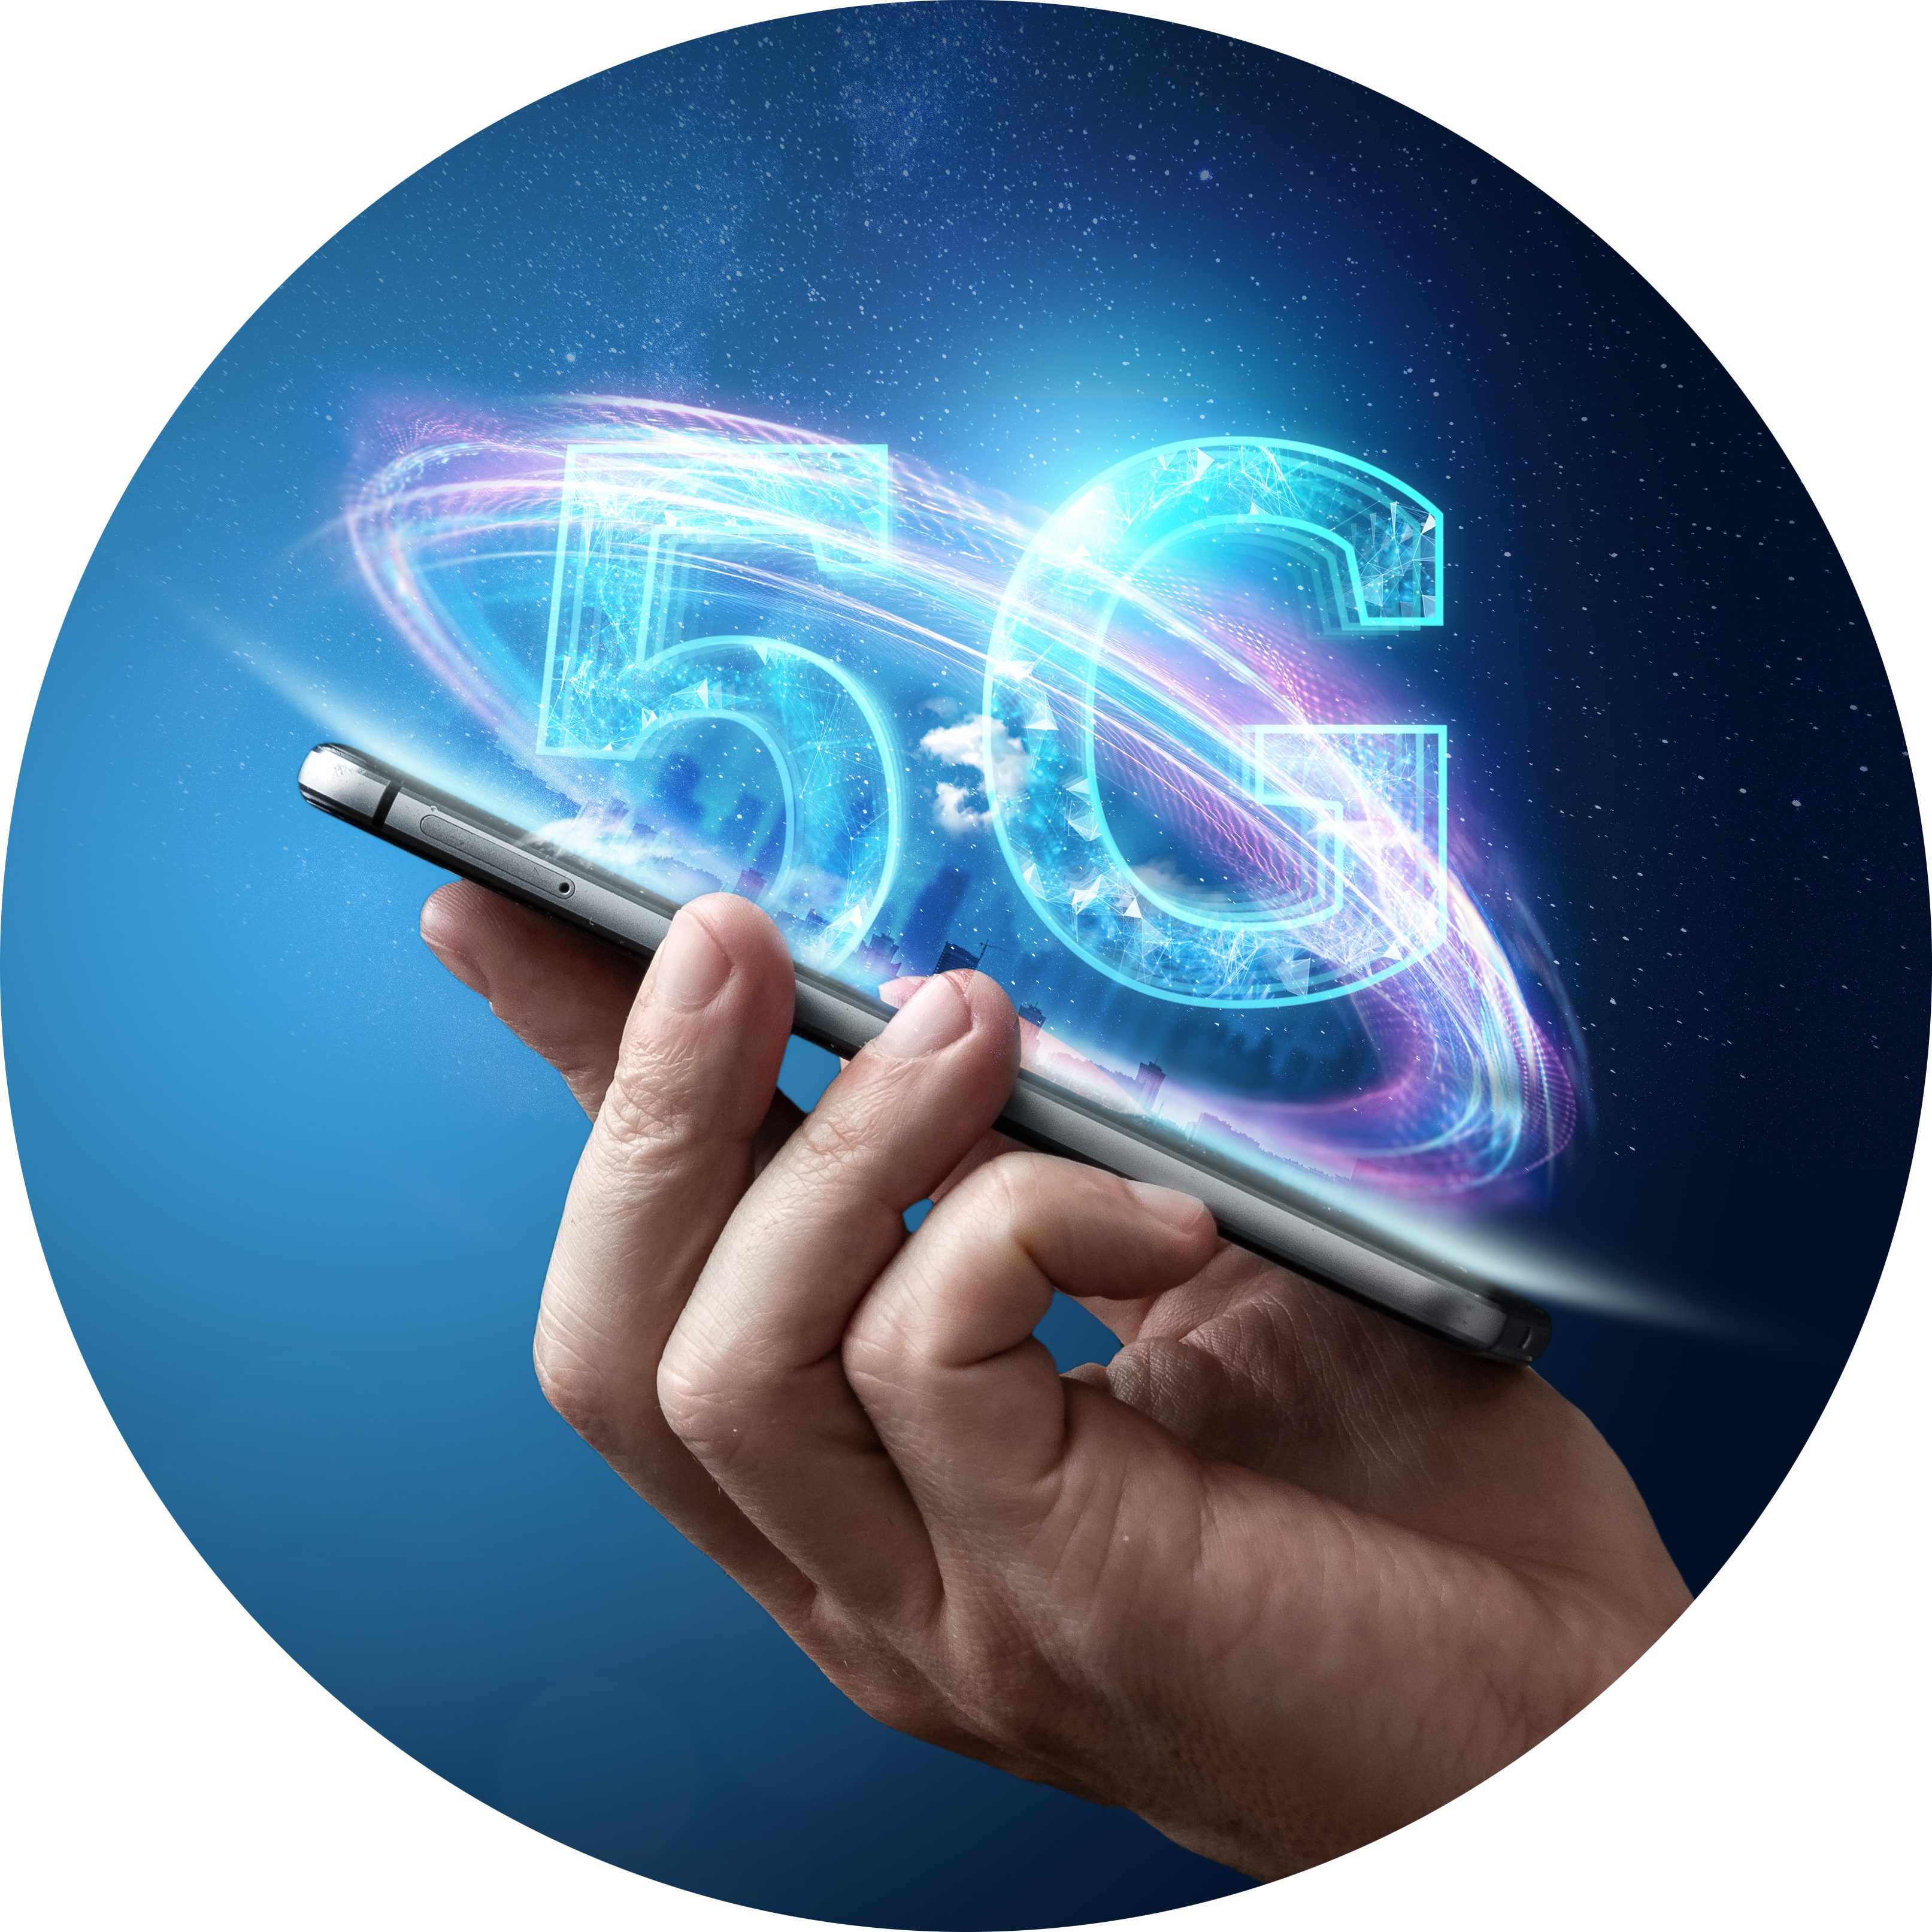 HALO Networks 5G